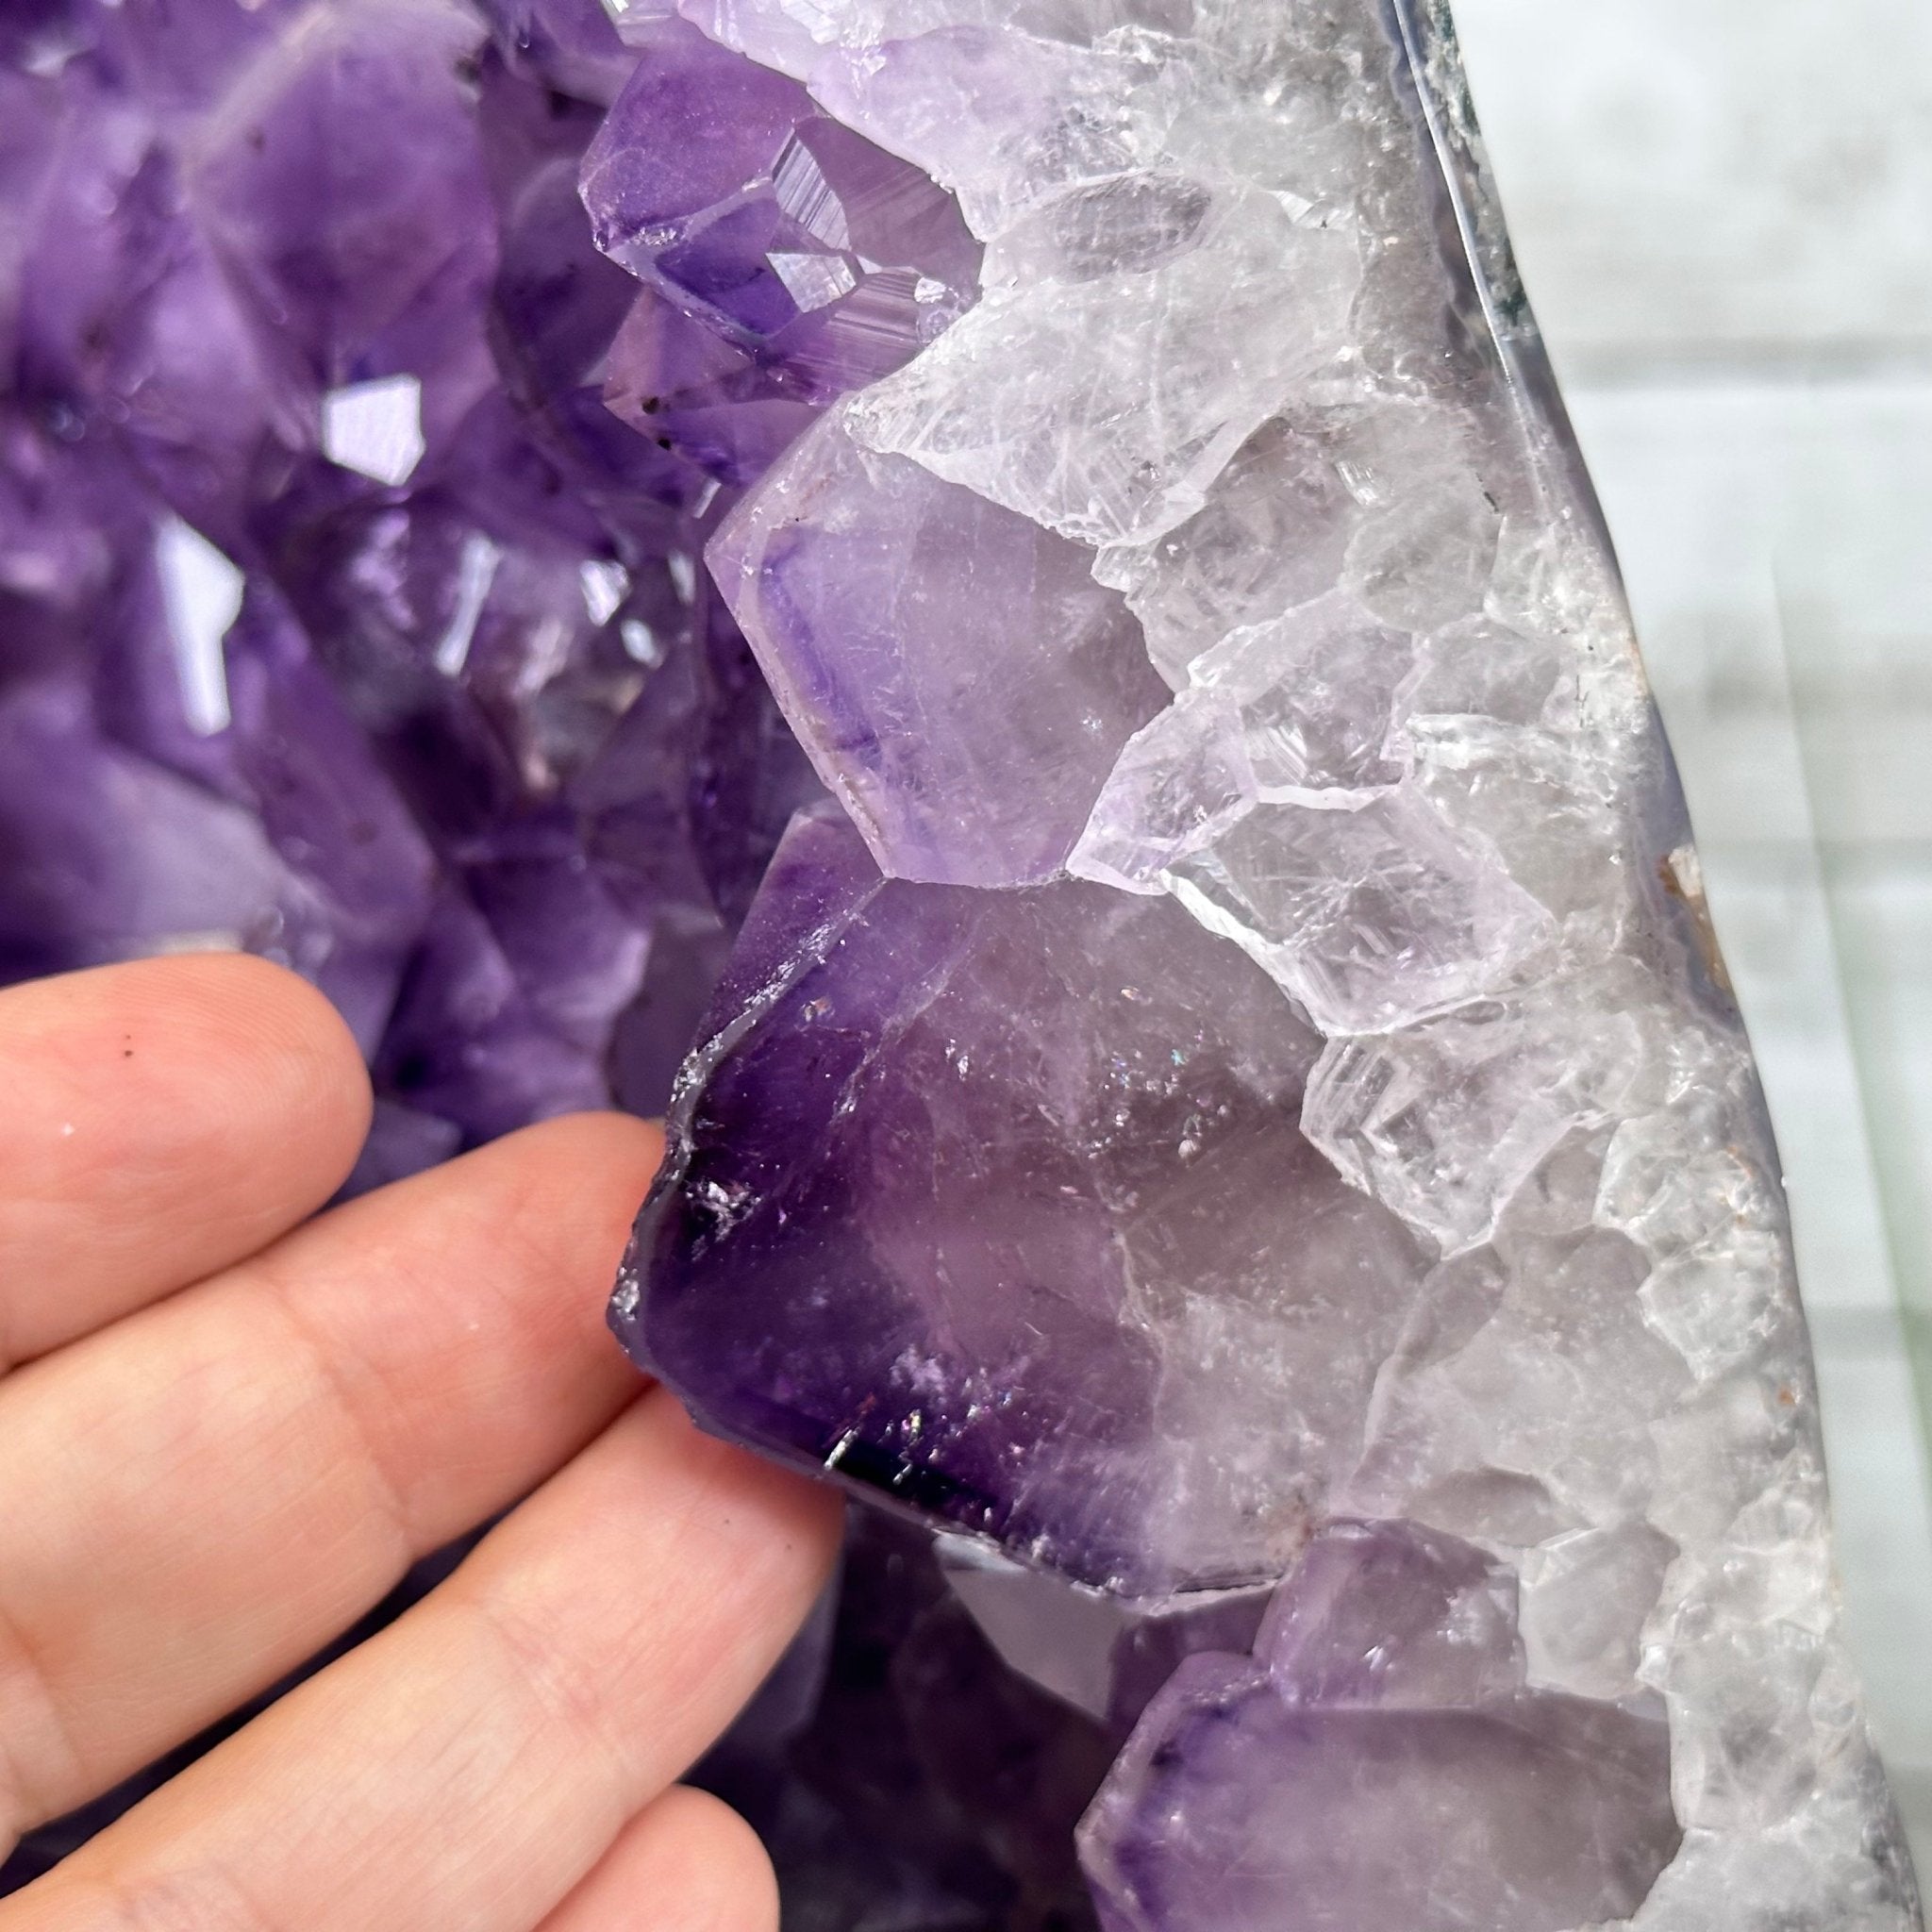 Extra Plus Quality Polished Brazilian Amethyst Cathedral, 78.9 lbs & 18.25" tall Model #5602-0179 by Brazil Gems - Brazil GemsBrazil GemsExtra Plus Quality Polished Brazilian Amethyst Cathedral, 78.9 lbs & 18.25" tall Model #5602-0179 by Brazil GemsPolished Cathedrals5602-0179